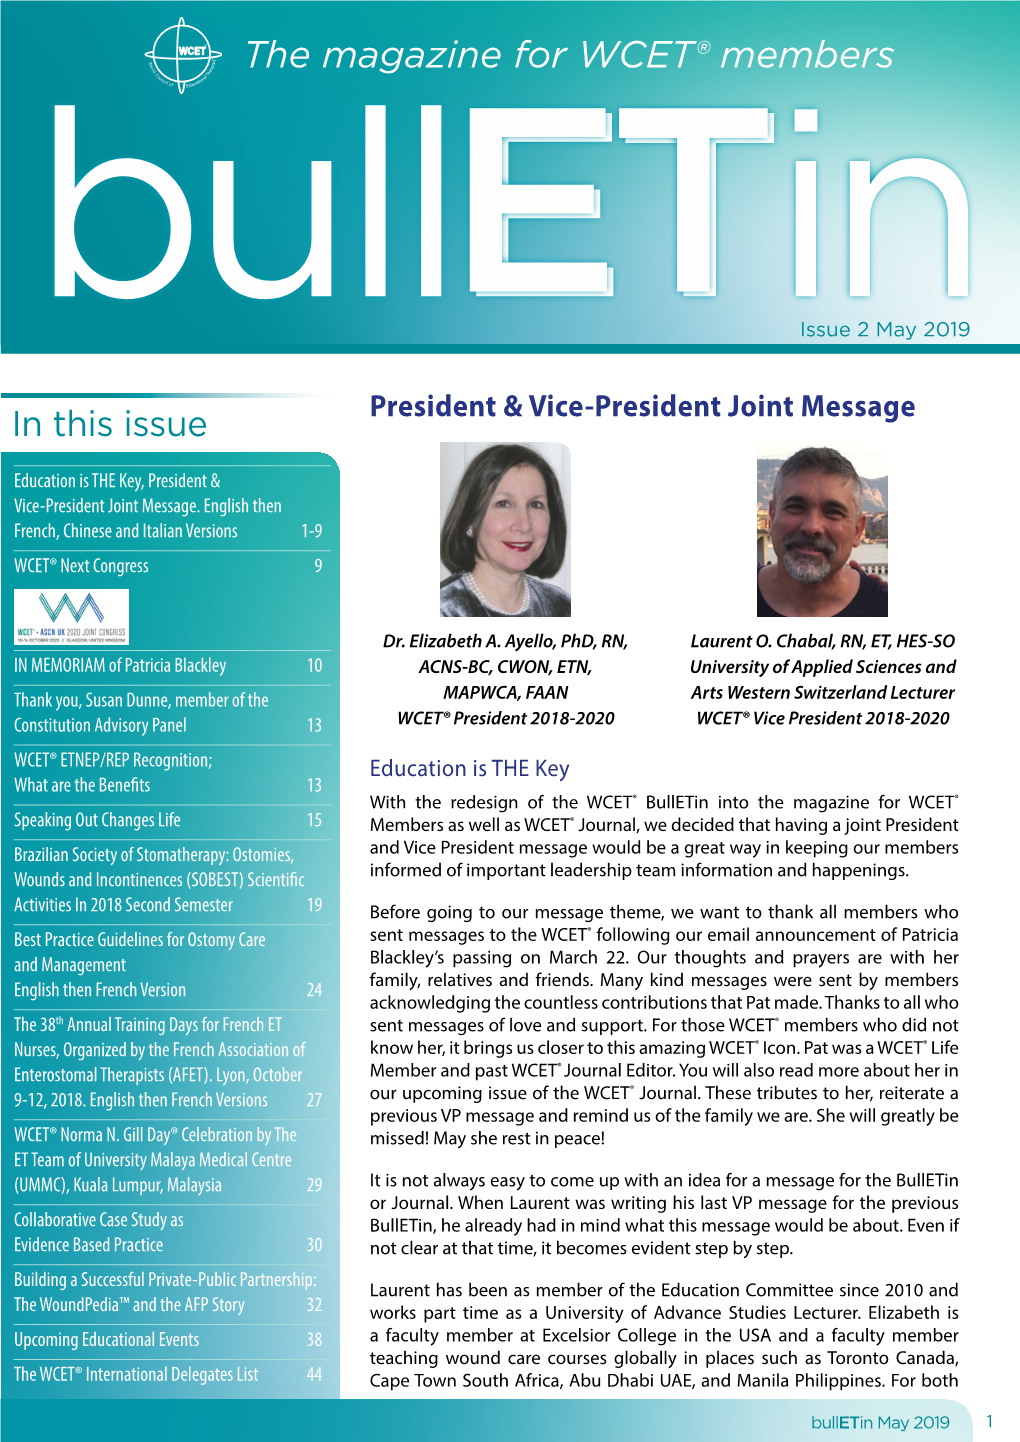 The Magazine for WCET® Members the Magazine for WCET® Members